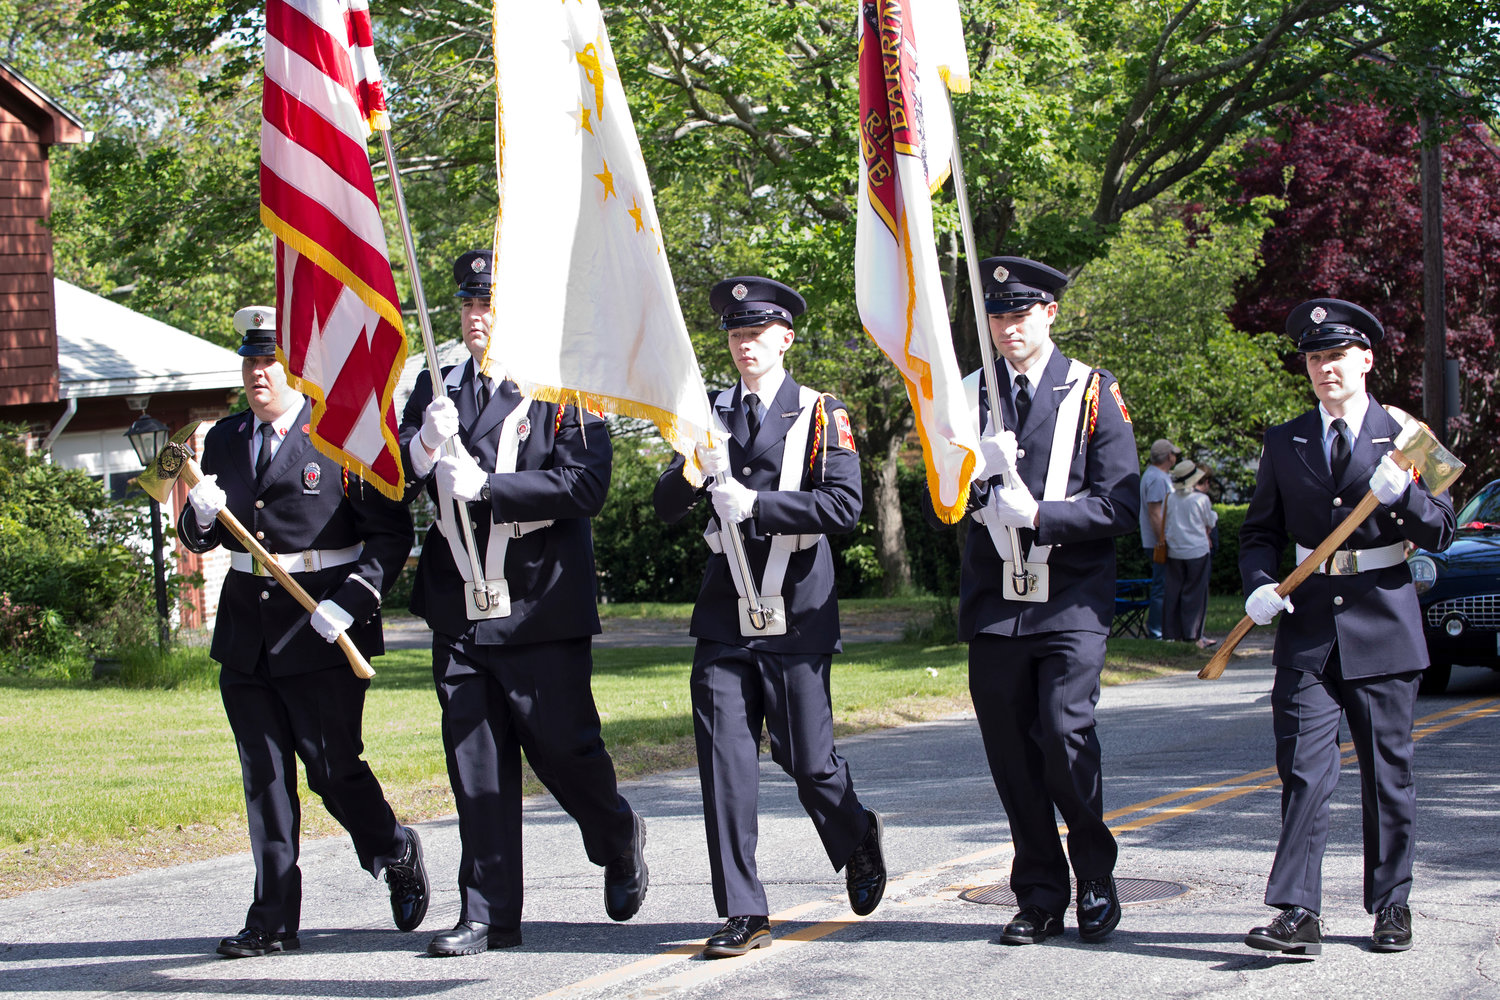 Members of the Barrington Fire Department march along Upland Way during a previous Memorial Day parade in Barrington.